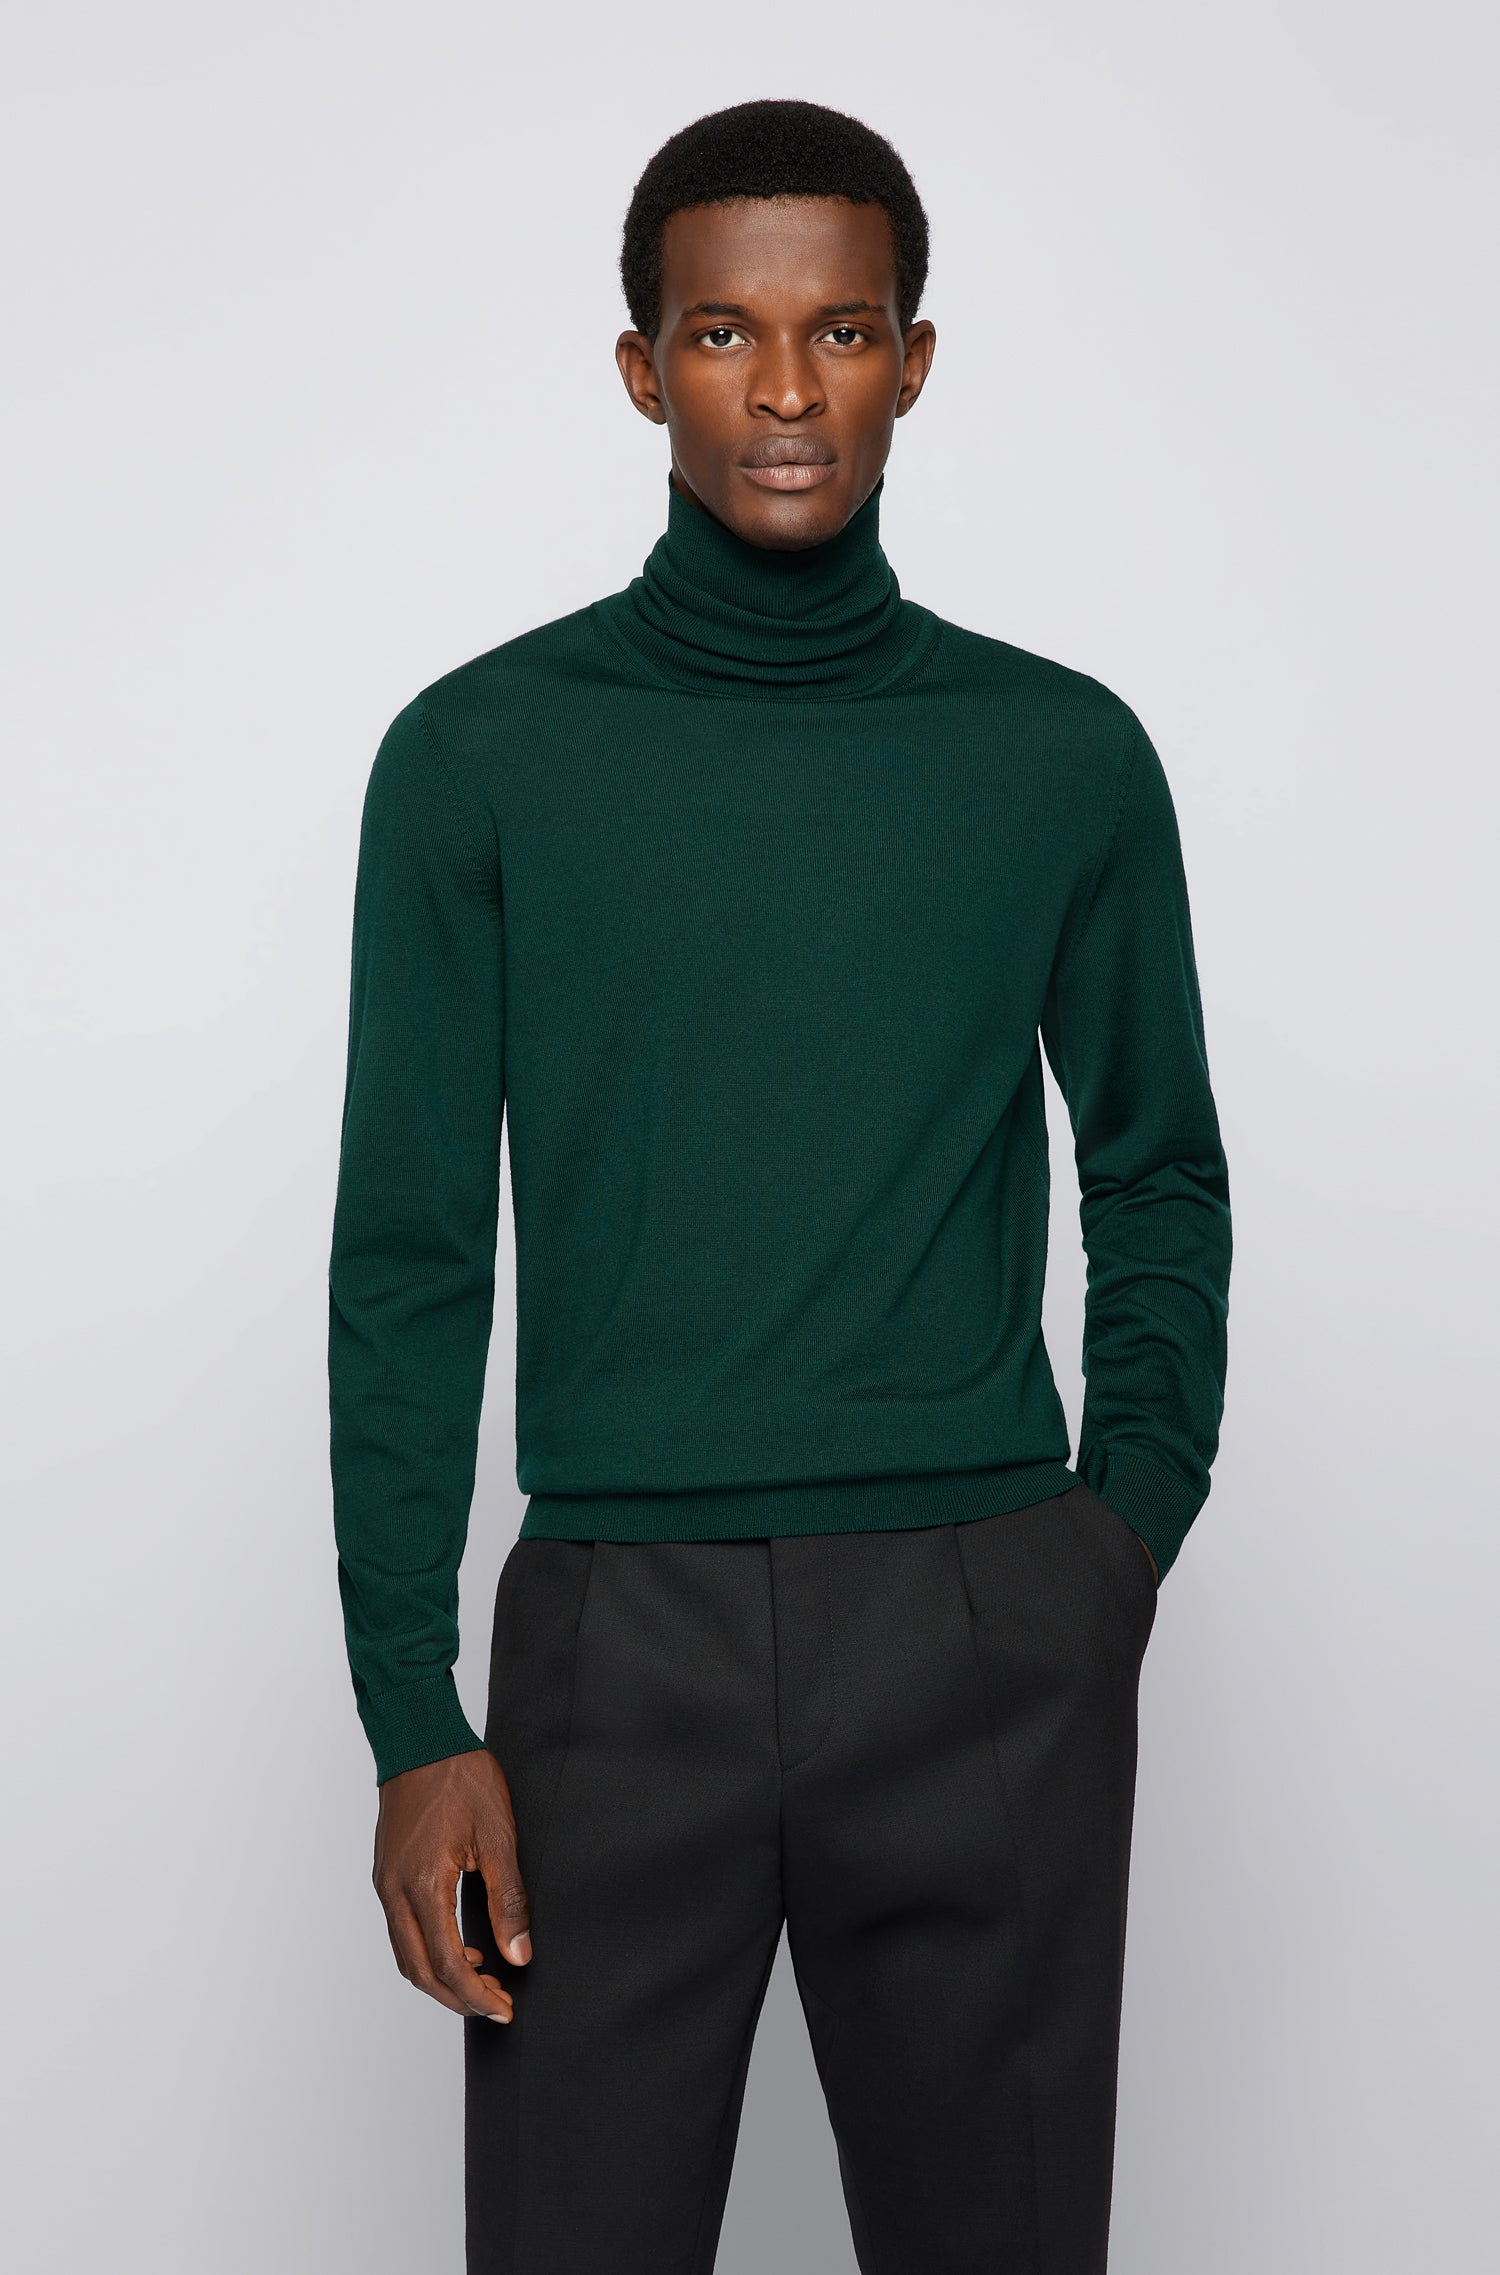 Men's White Horizontal Striped Crew-neck Sweater, Dark Green Wool Dress  Pants, Burgundy Leather Chelsea Boots, Green Canvas Holdall